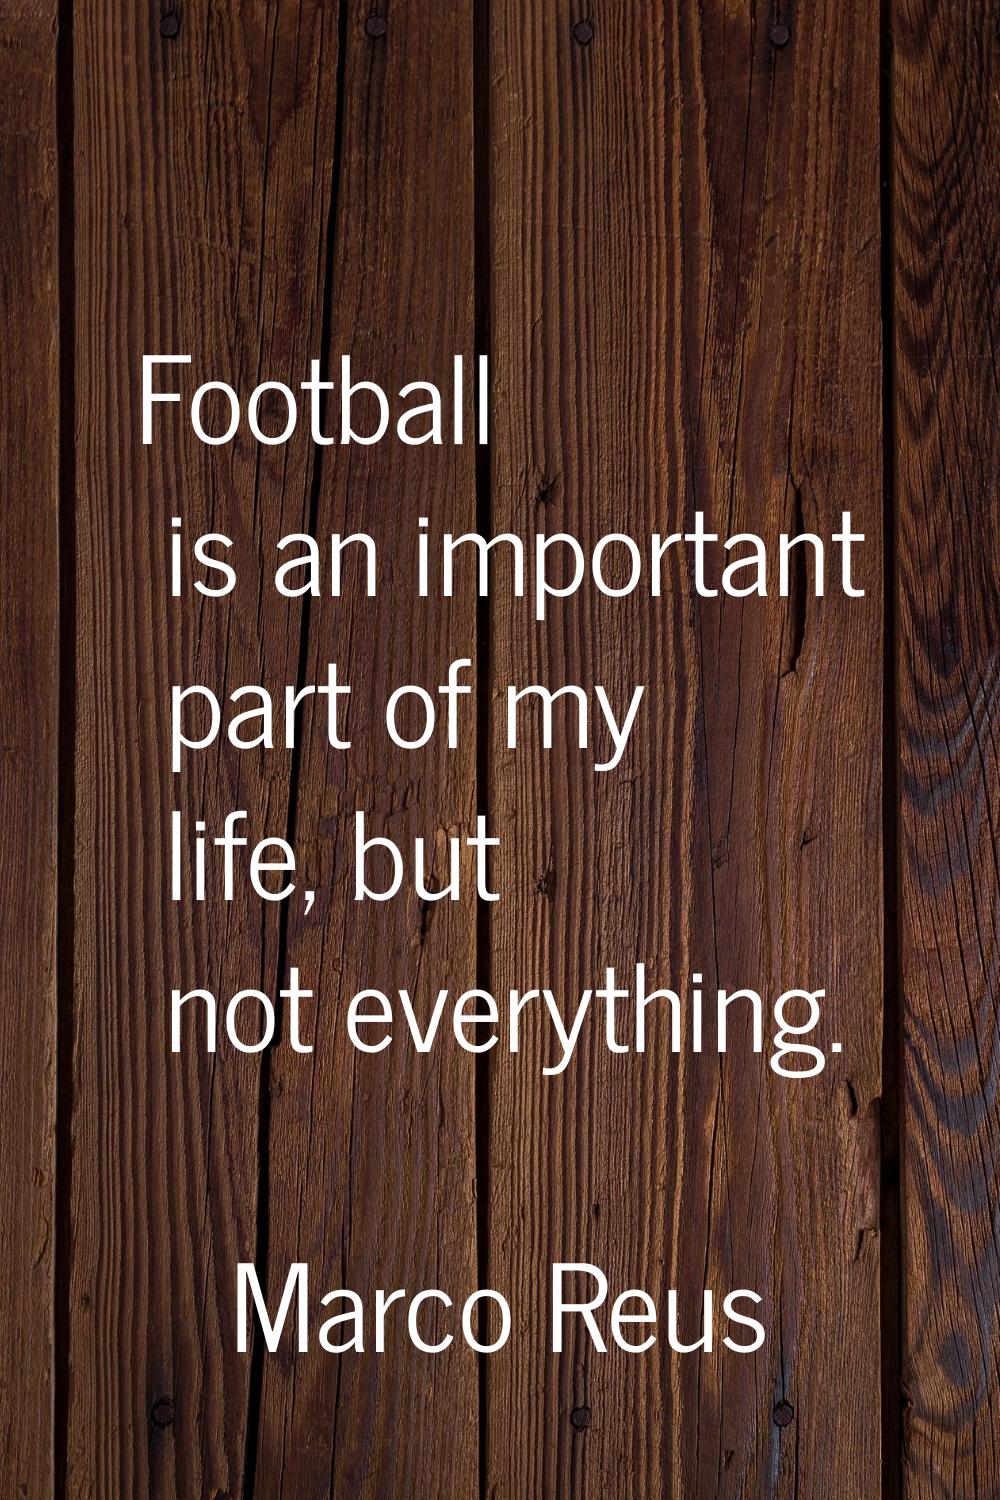 Football is an important part of my life, but not everything.